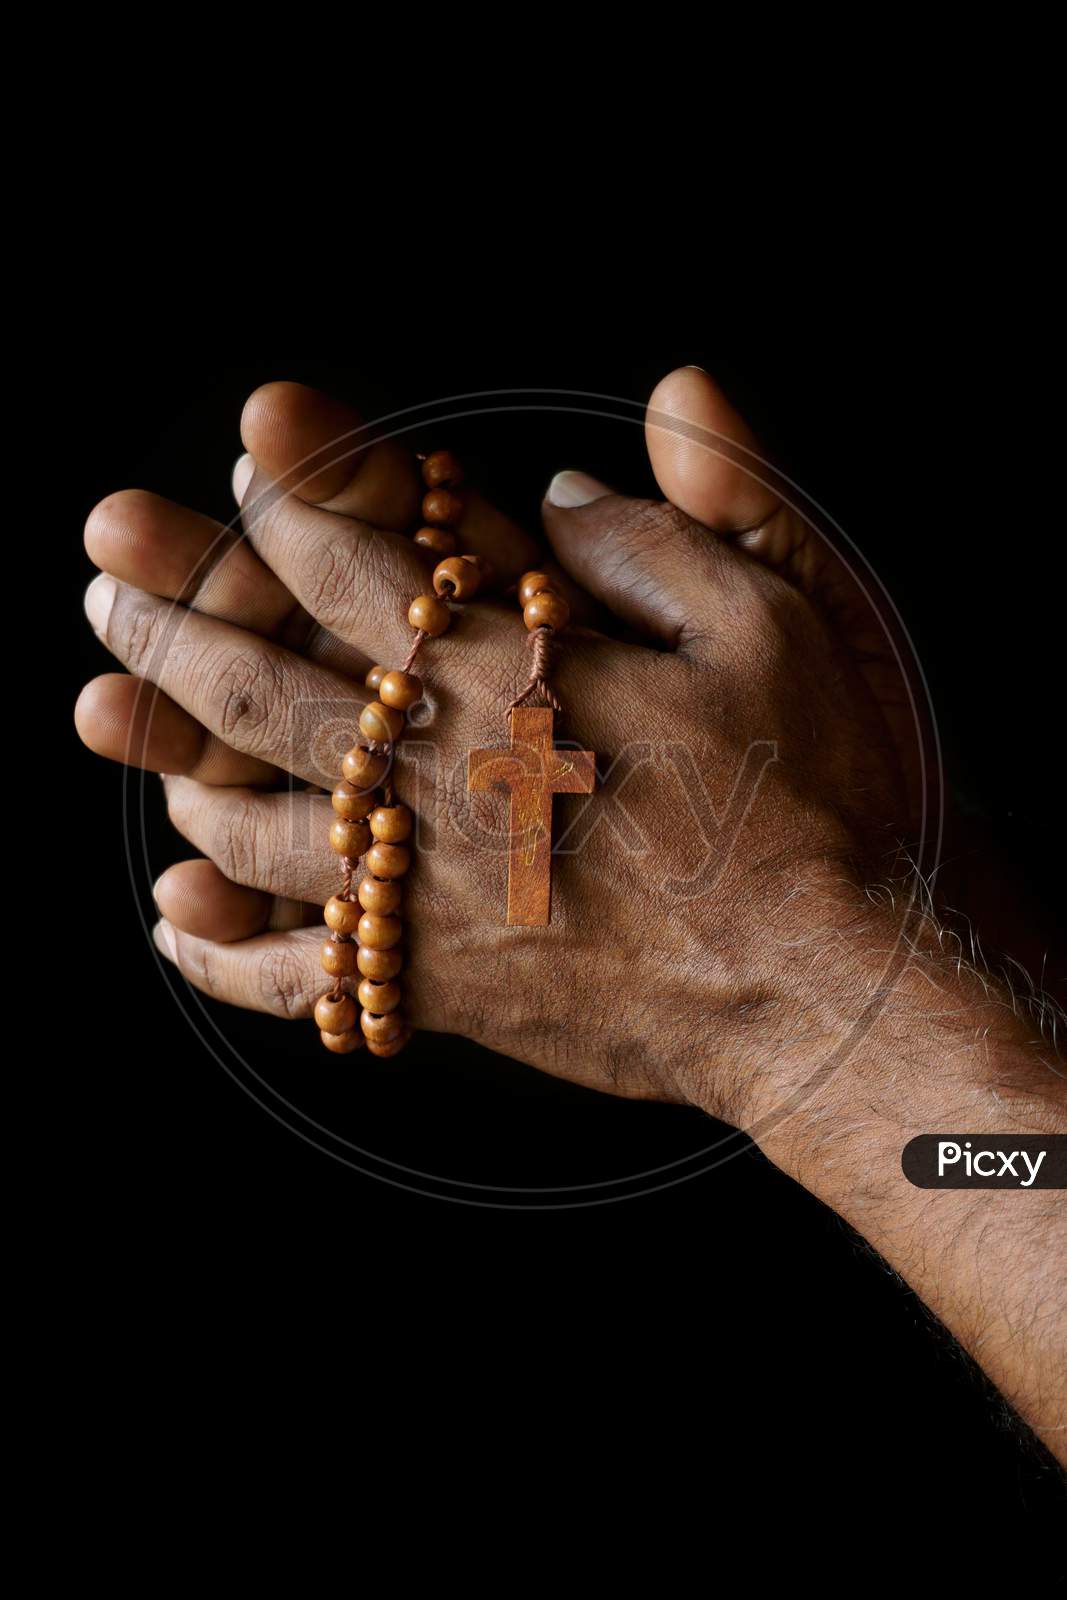 Praying Hand Of An Old Indian Catholic Man With Wooden Rosary Isolated On A Plain Black Background.